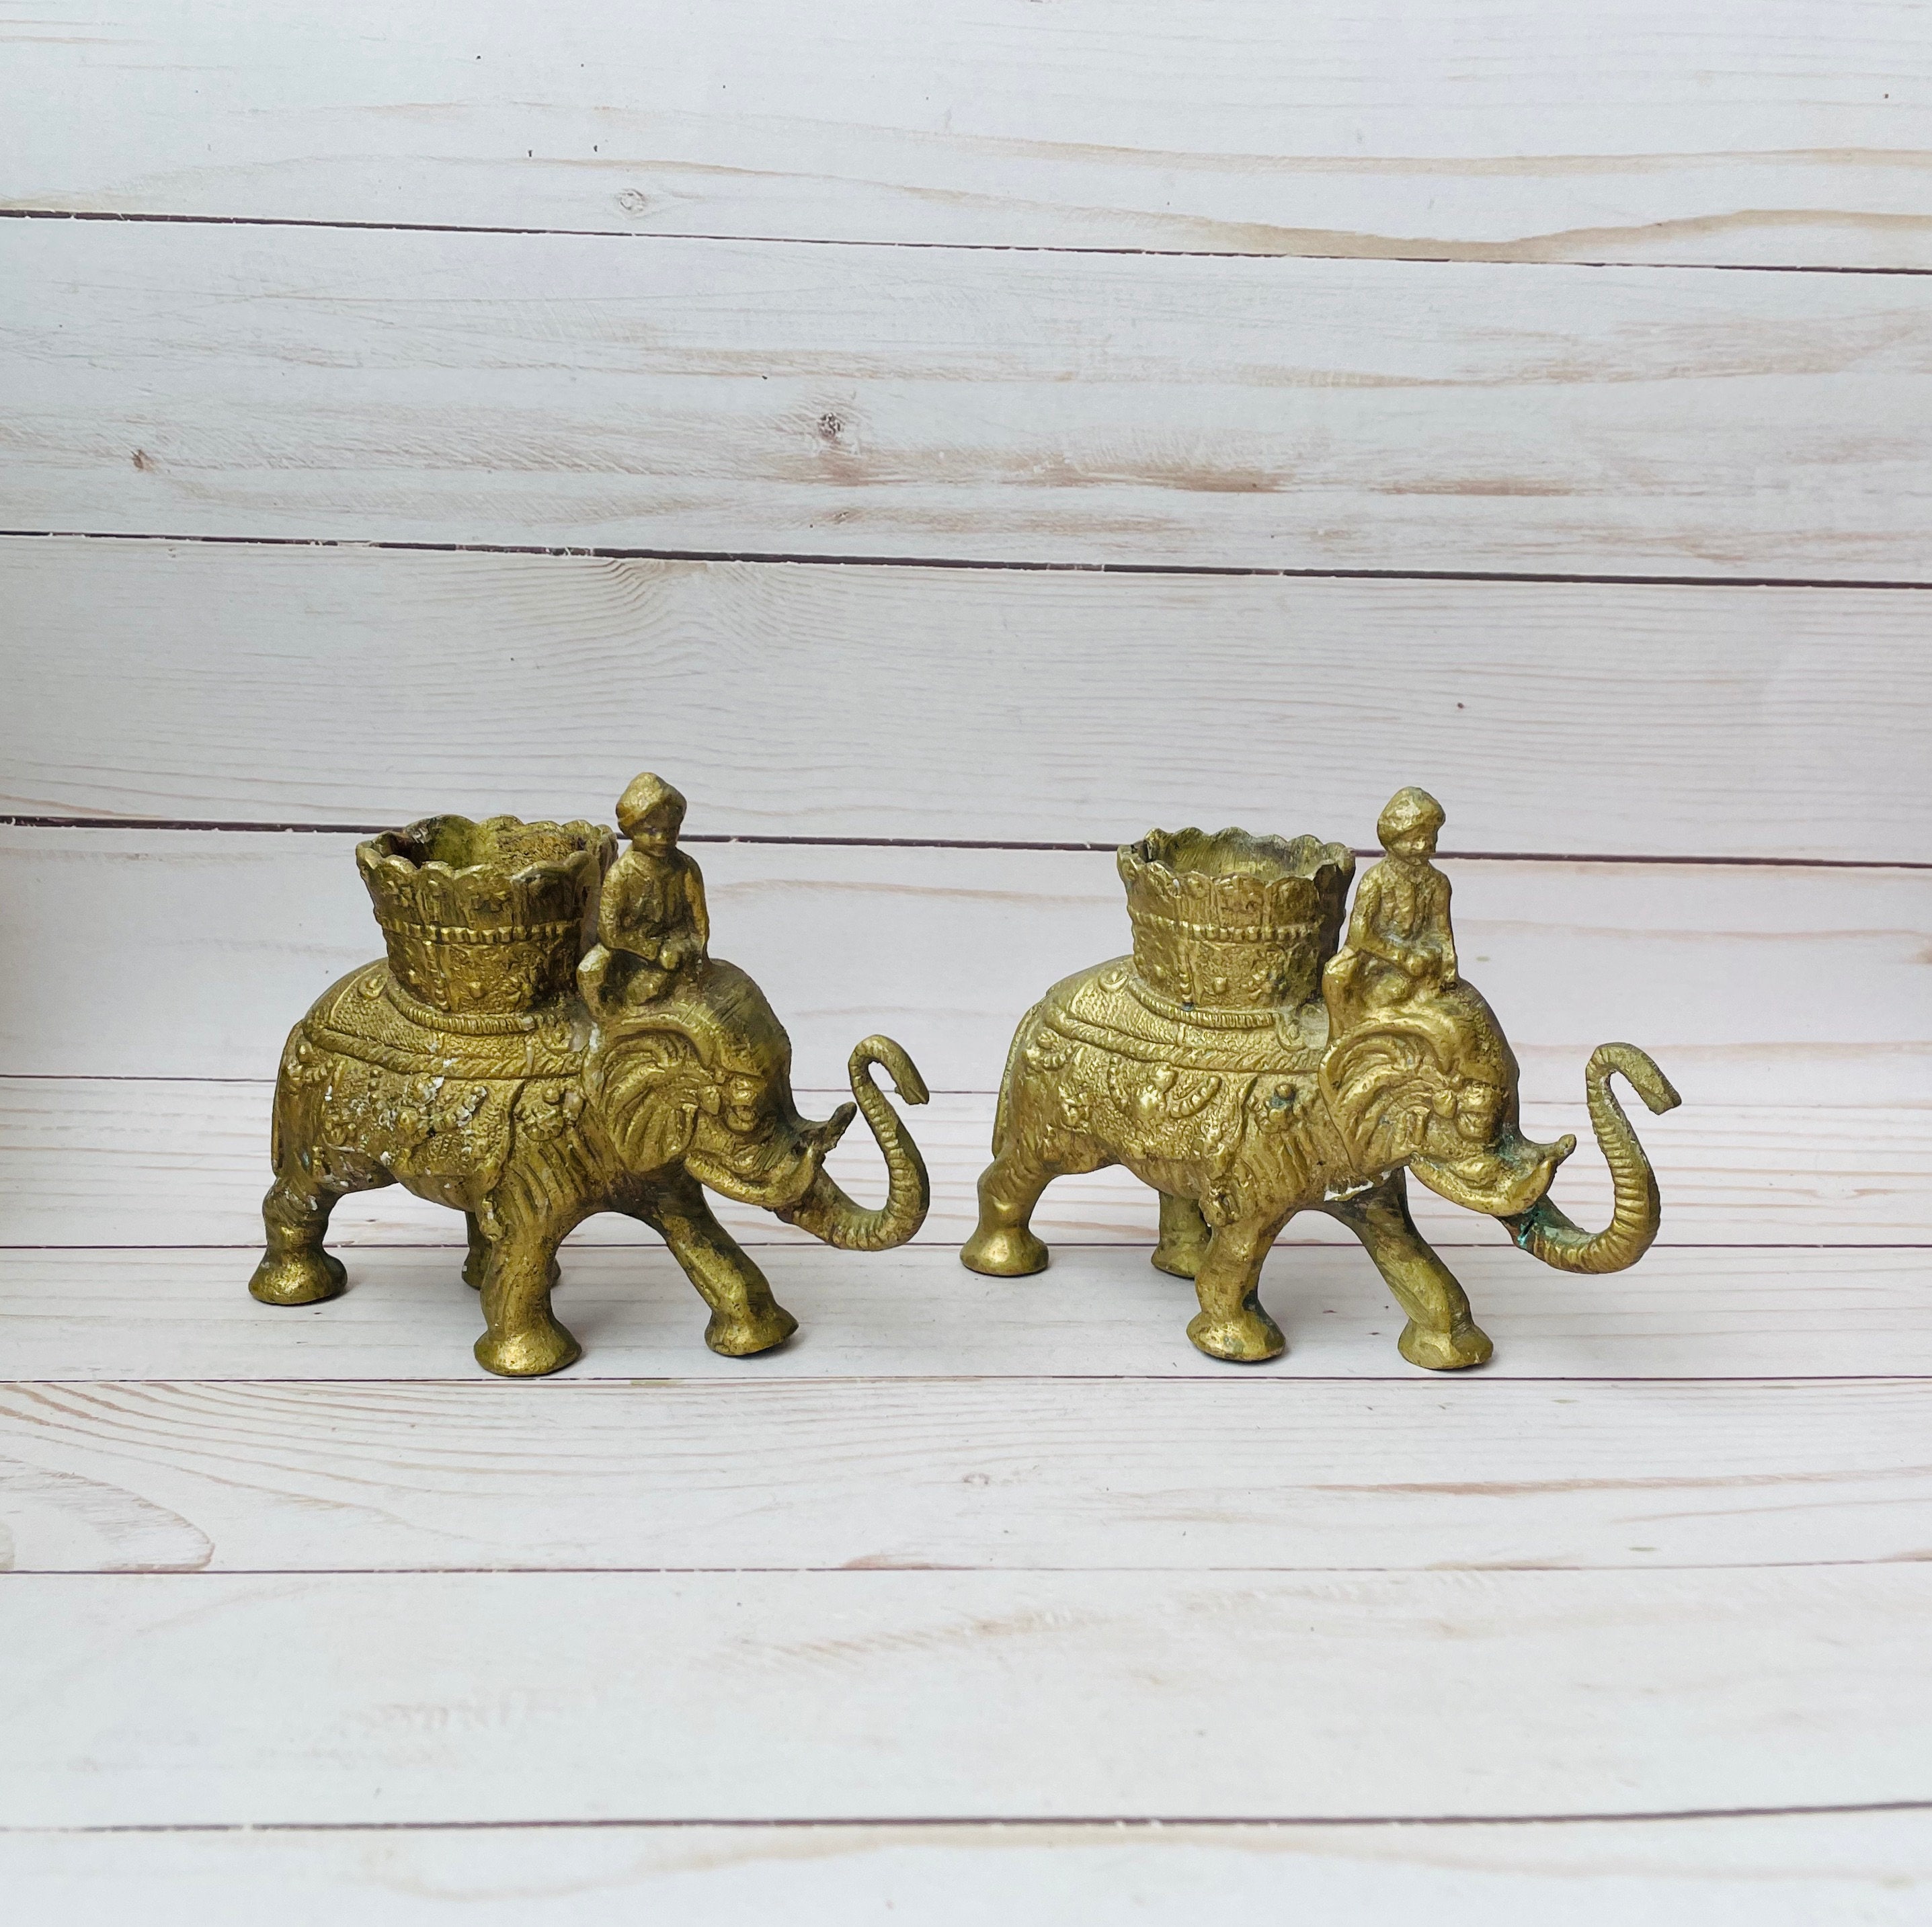 5x5 " Heavy 994 gm Candle Holder Elephant Brass Candlestick Trunk Up 12x12 cm 